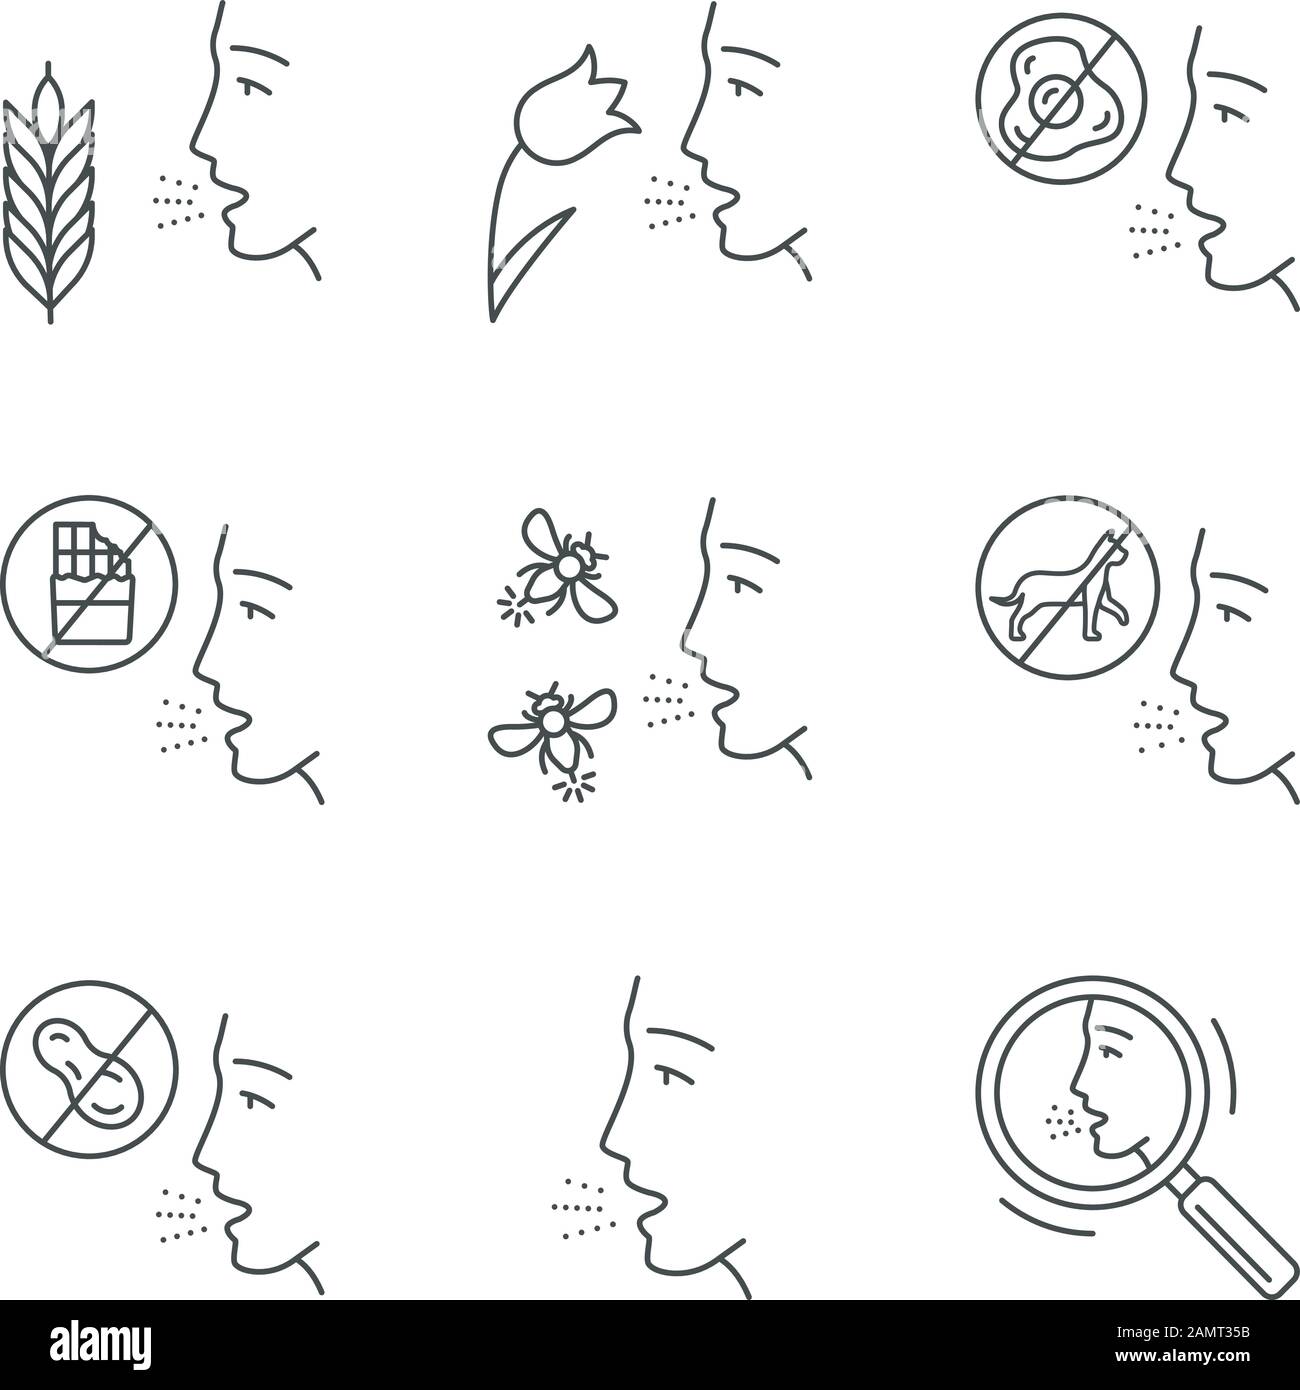 Allergies linear icons set. Food, animal, insect stings allergy, hay fever, diagnosis. Healthcare, medicine. Thin line contour symbols. Isolated vecto Stock Vector